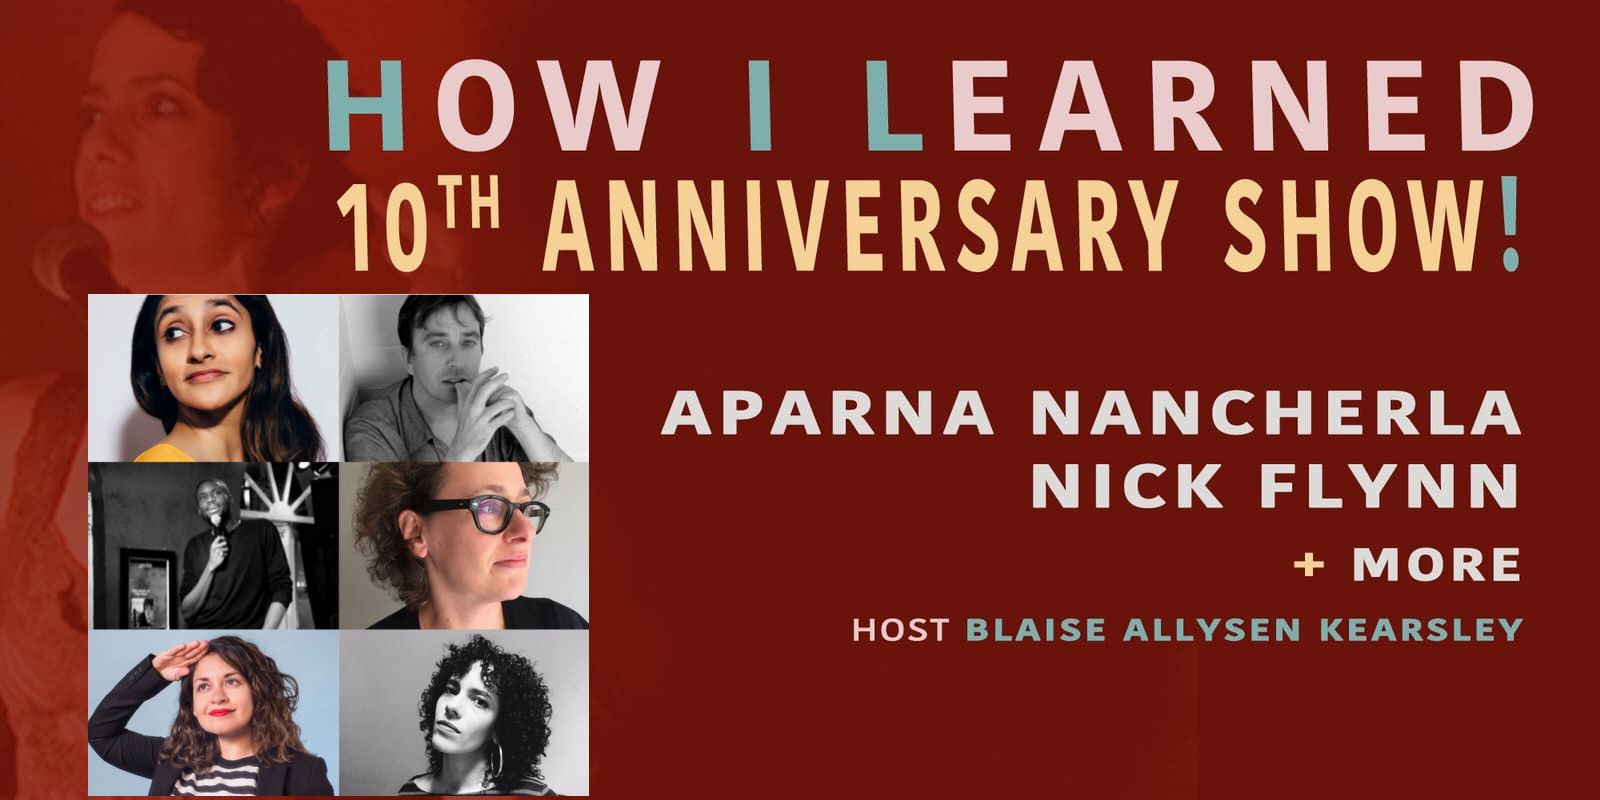 How I Learned It's Not Like on TV: Tenth Anniversary Show!